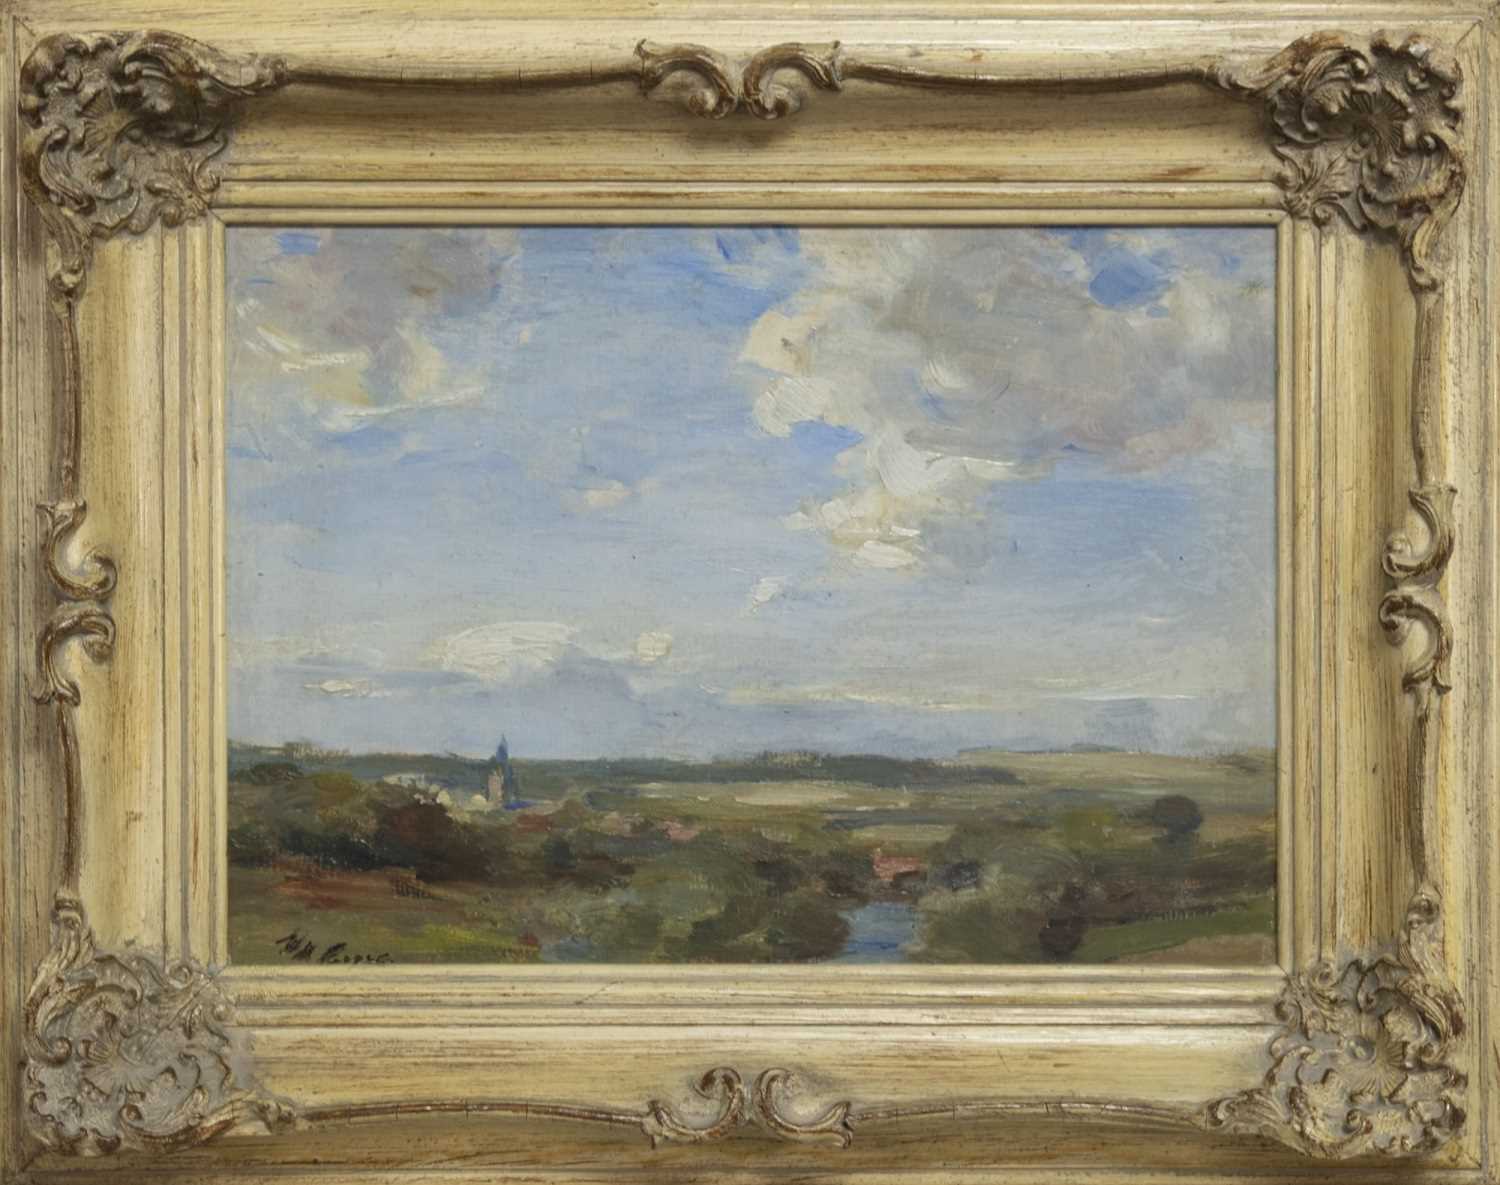 Lot 300 - THE CHANGING SKY, AN OIL BY WILLIAM MILLER FRAZER